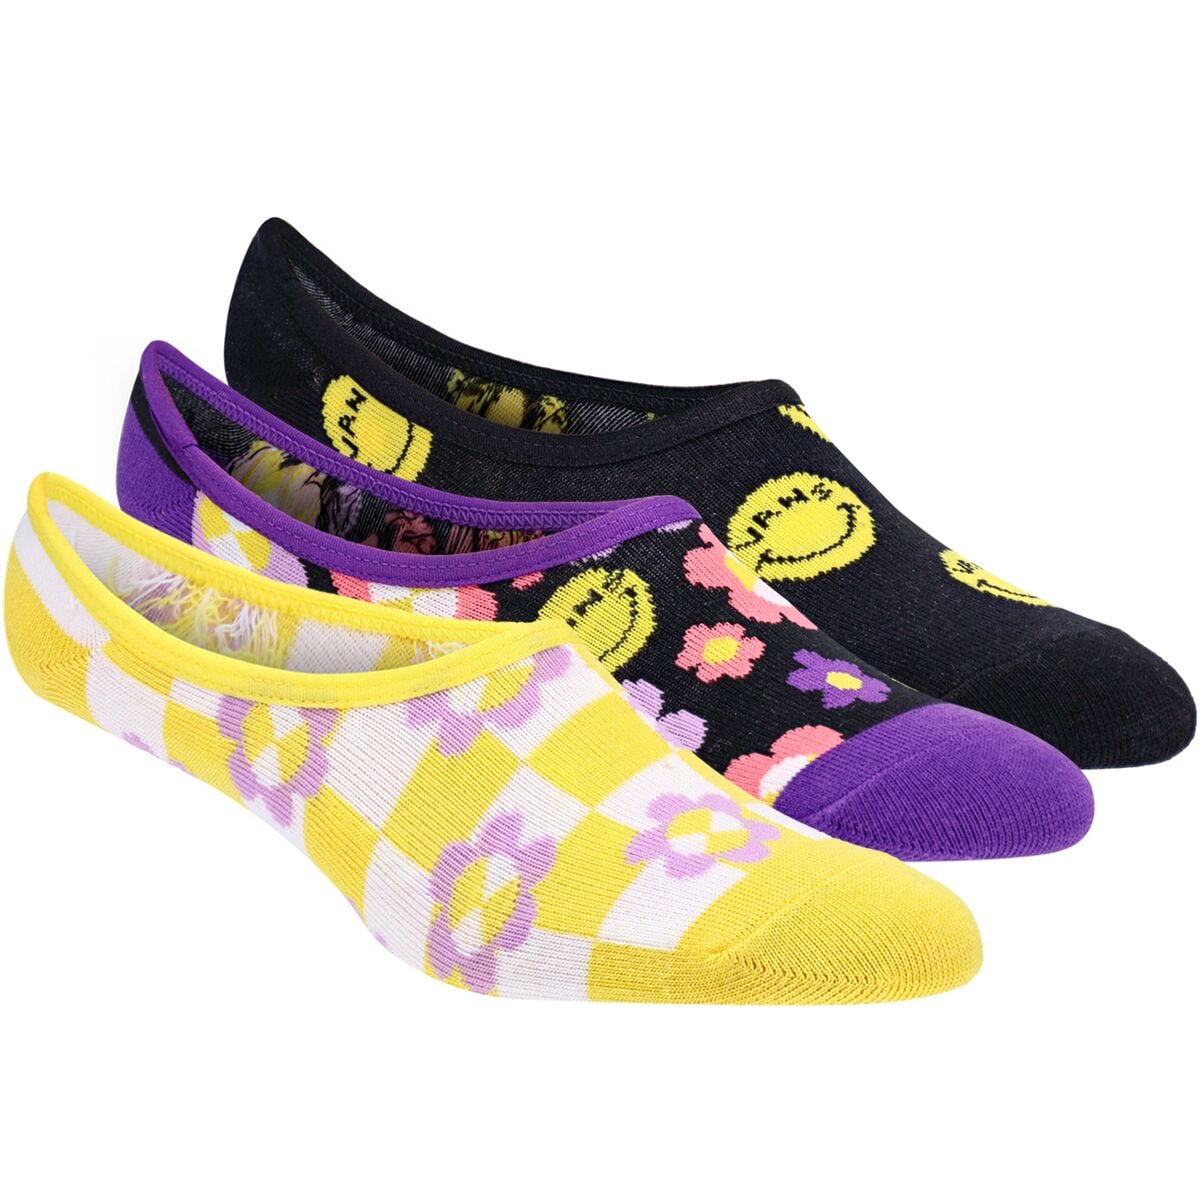 Vans Radically Happy Canoodle Sock - 3-Pack - Women's